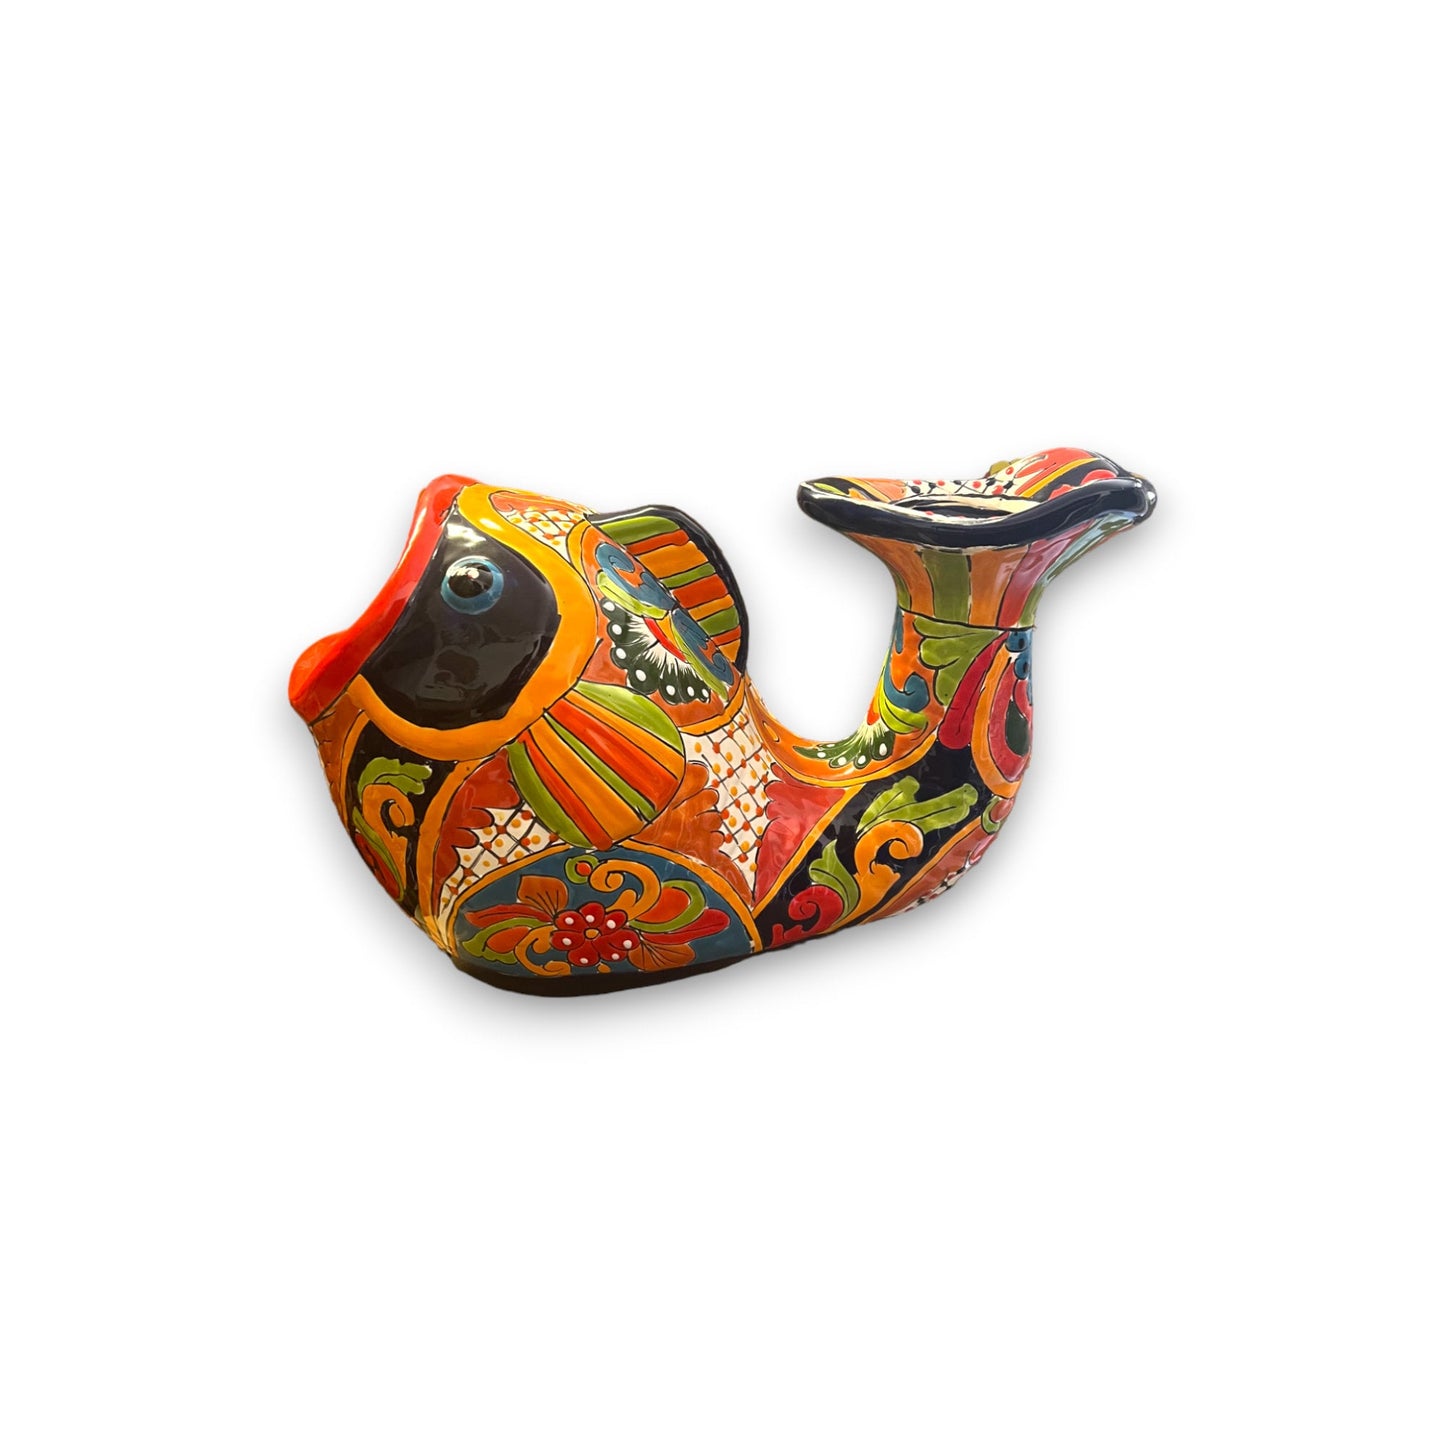 Handmade Talavera Fish Planter | Colorful Mexican Art for Home and Garden (Large)